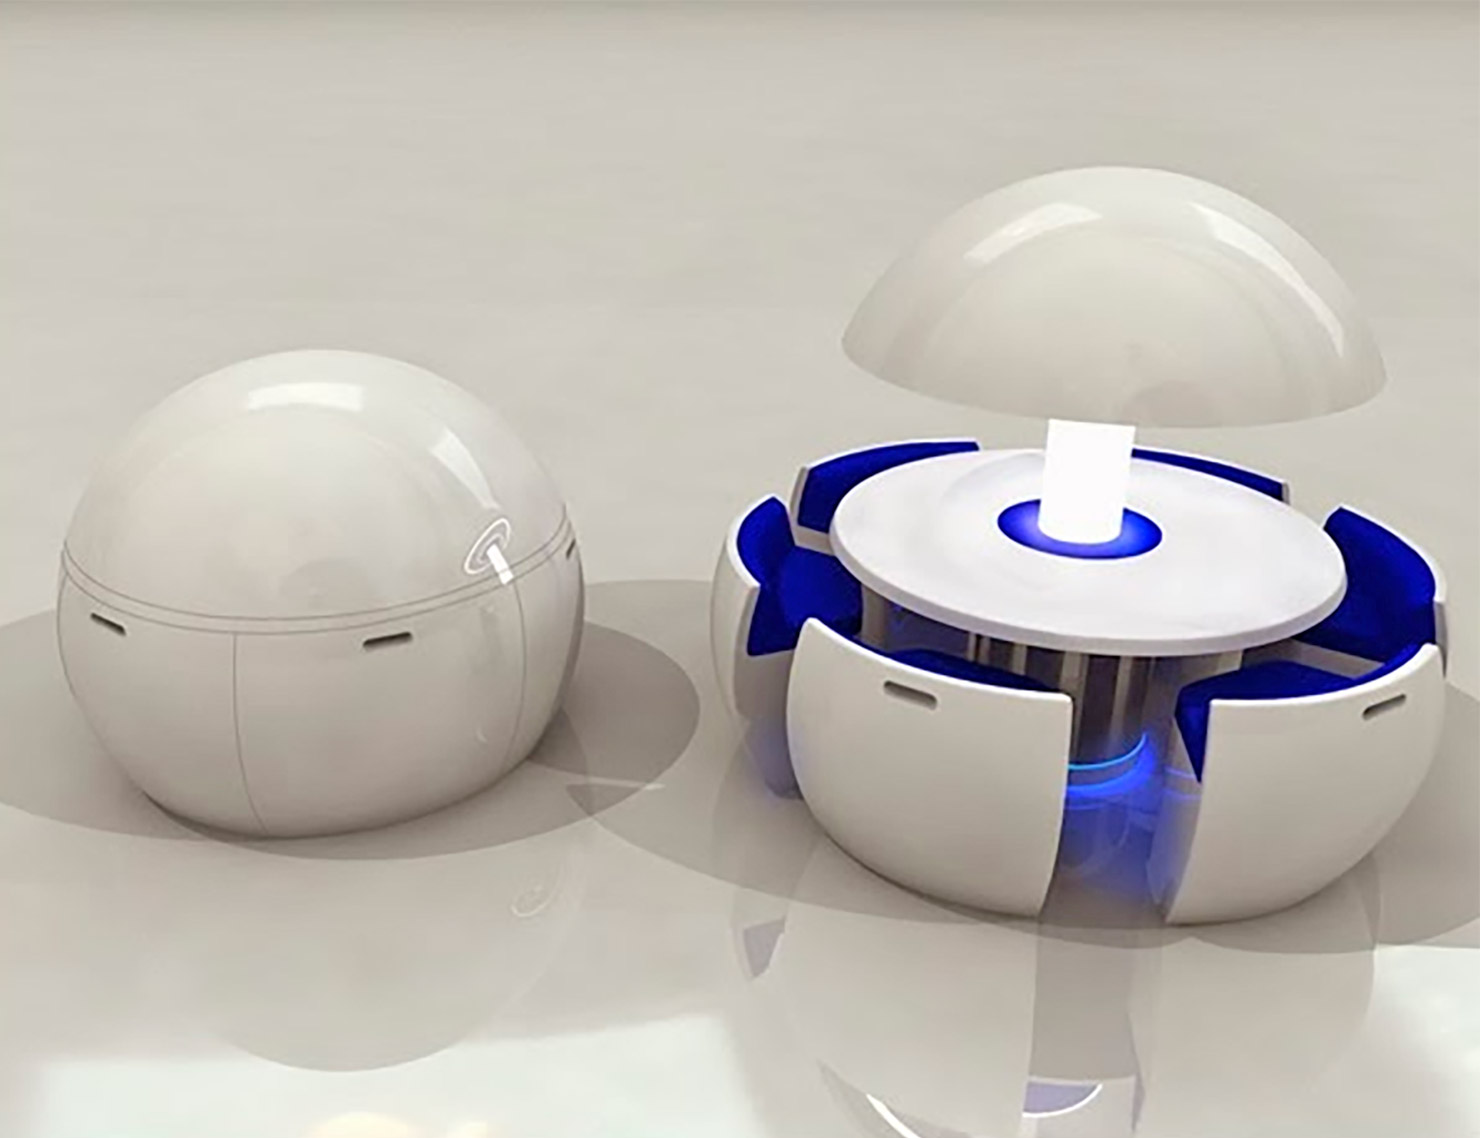 Kure Futuristic Dining Table Turns Into an Egg When Not In Use